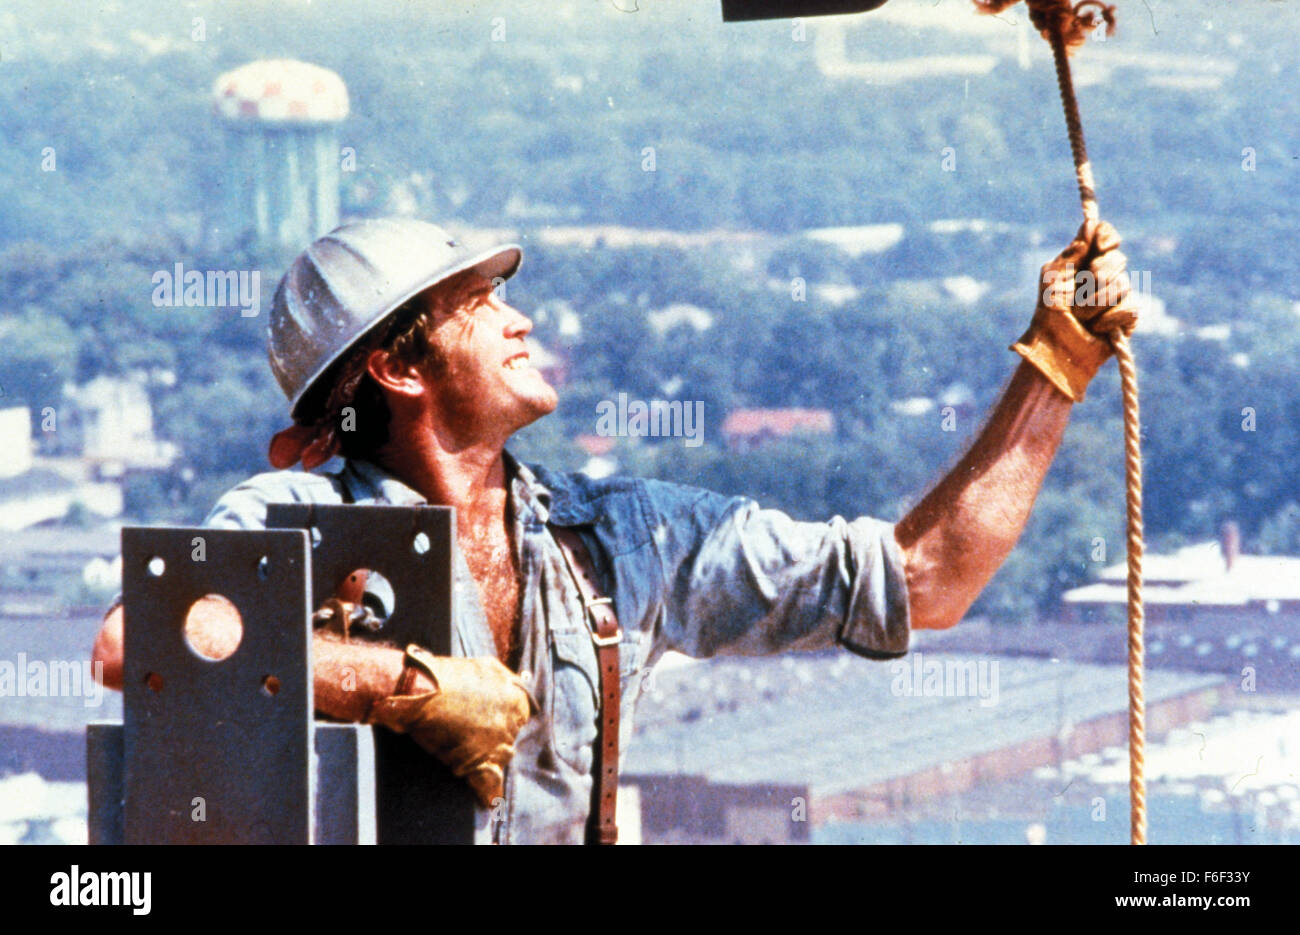 RELEASE DATE: Aug 21, 1979. MOVIE TITLE: Steel. STUDIO: Fawcett-Majors Productions. PLOT: Mike Catton was once a world-renowned construction foreman (at least in the construction world), but an accident left him with a serious fear of heights. Unable to climb the big skyscrapers while under construction, he retired and became a truck driver. But when an old friend needs him to help put up a building, and when the old friend gets harassed and threatened by an Evil Corporate Type, he comes out of retirement and assembles the creme de la creme of the construction world. Together, they race agains Stock Photo